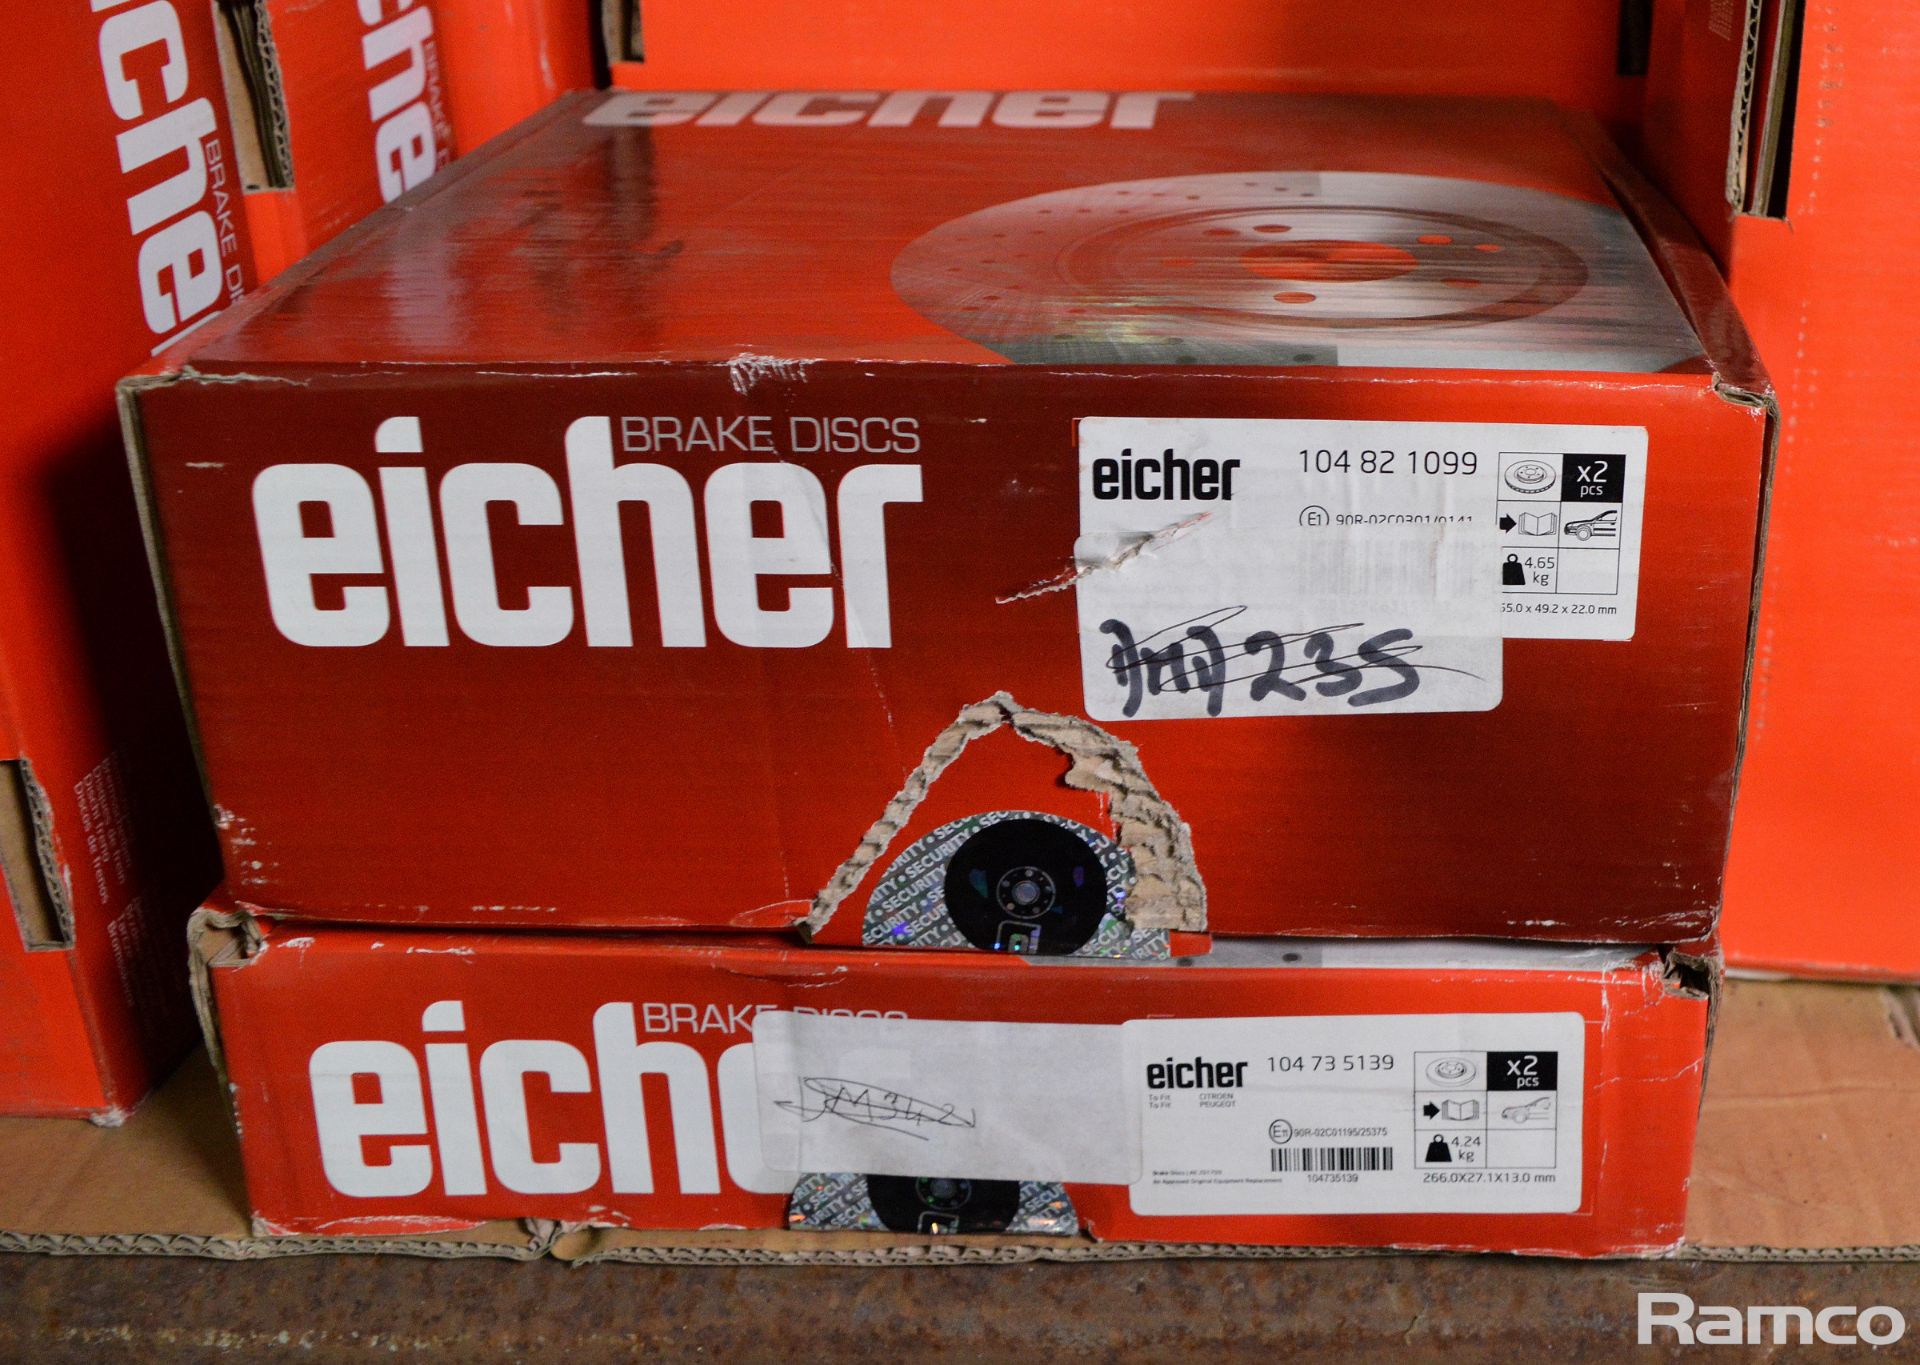 Eicher brake discs - see pictures for model / type - Image 7 of 7